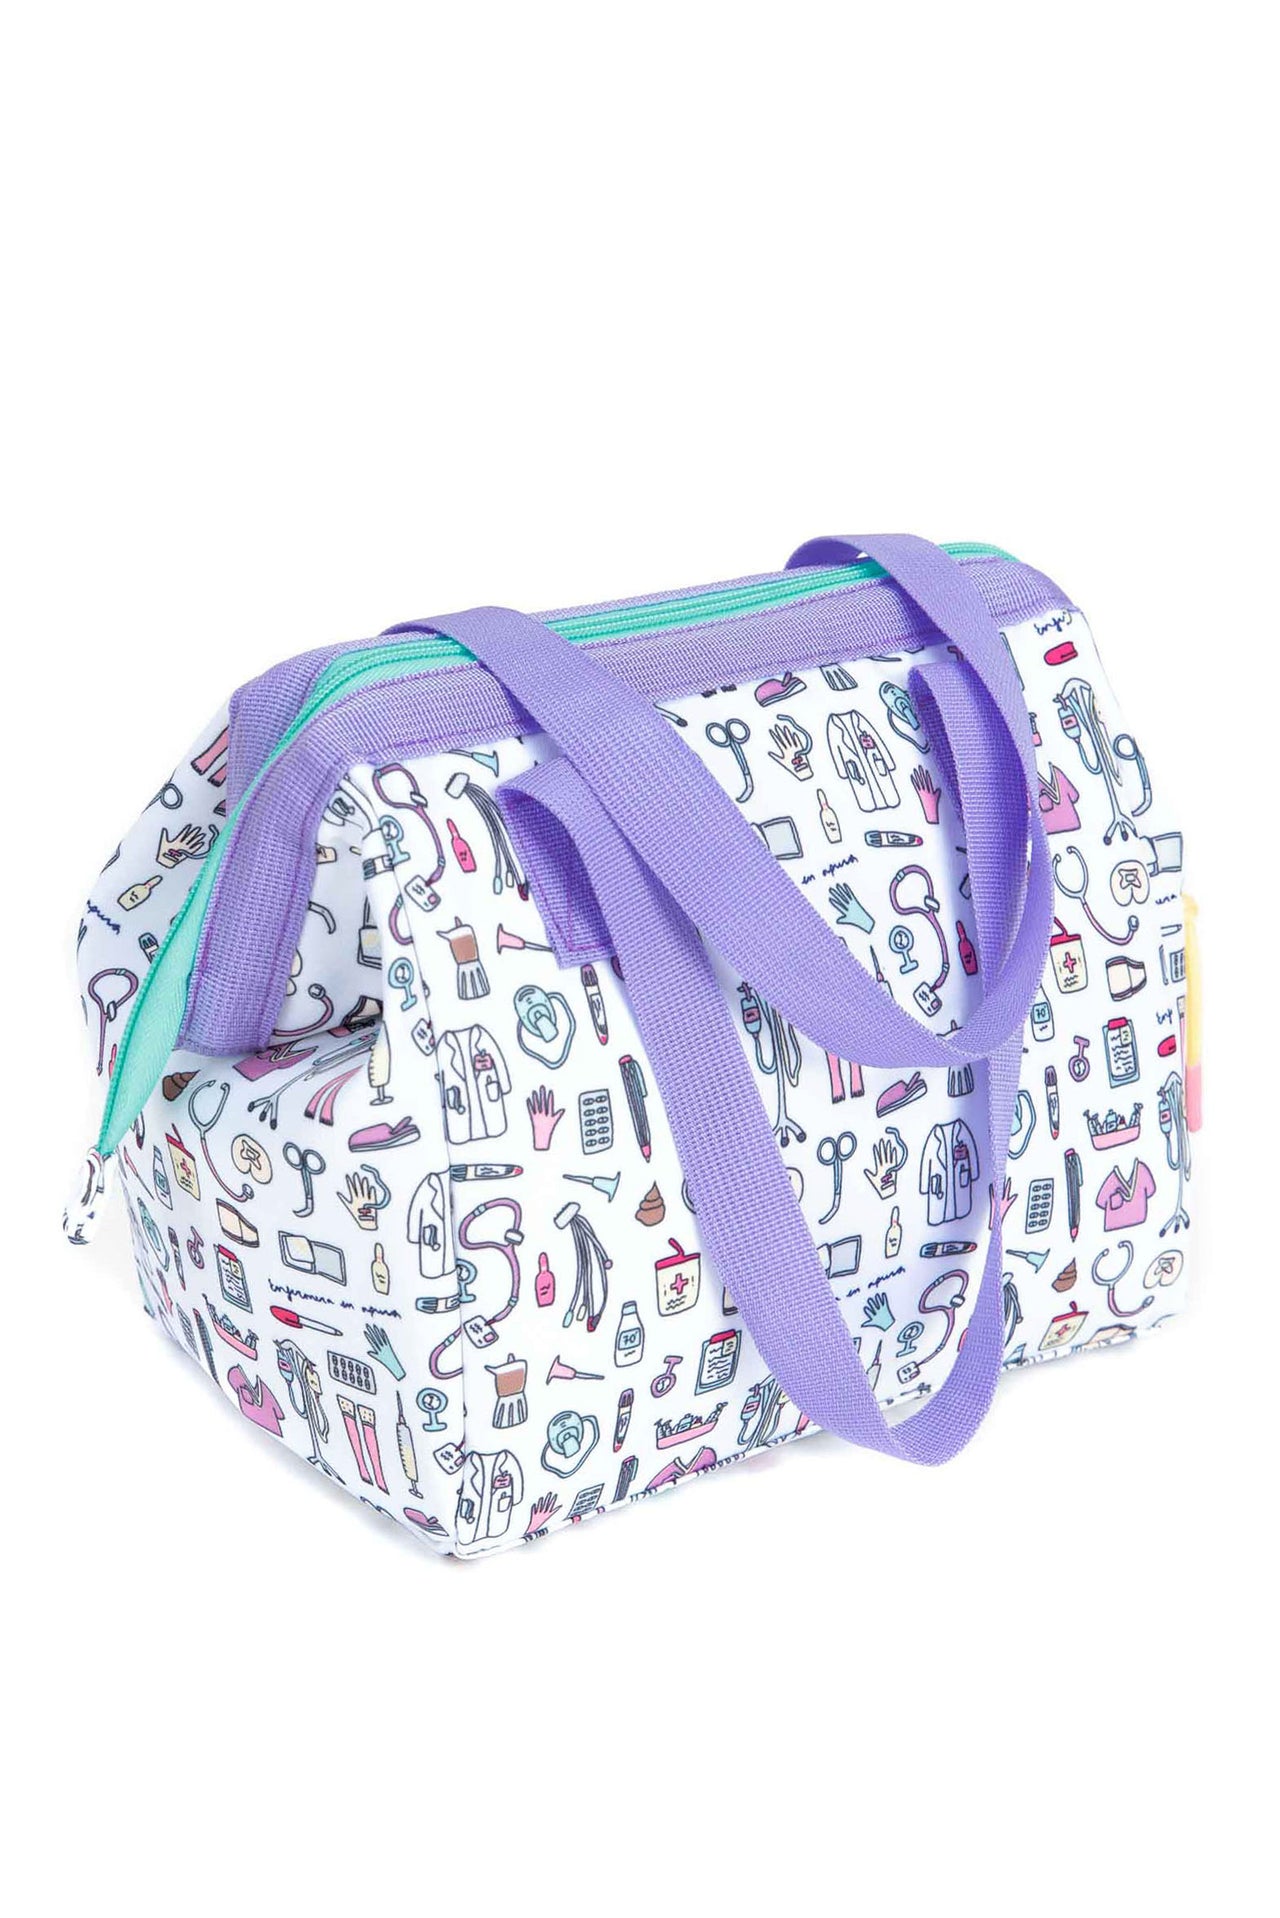 LUNCH BAG  WITH HANDLES - NURSES THINGS